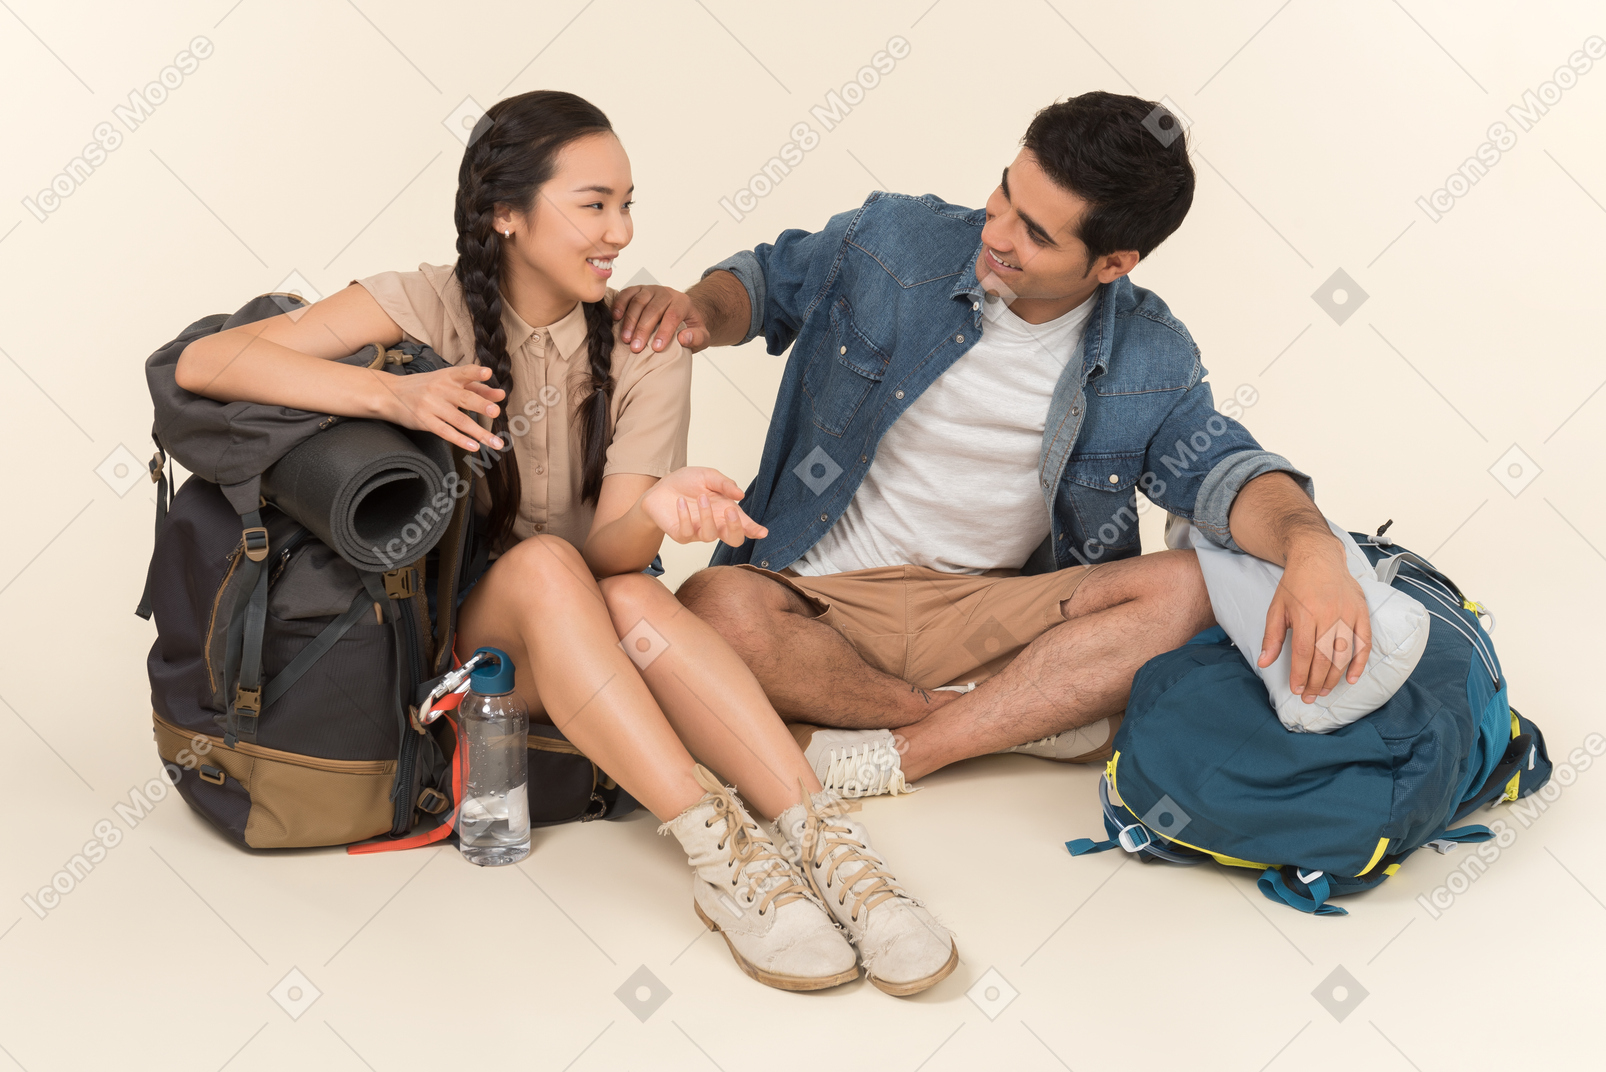 Young interracial couple sitting near backpacks and talking